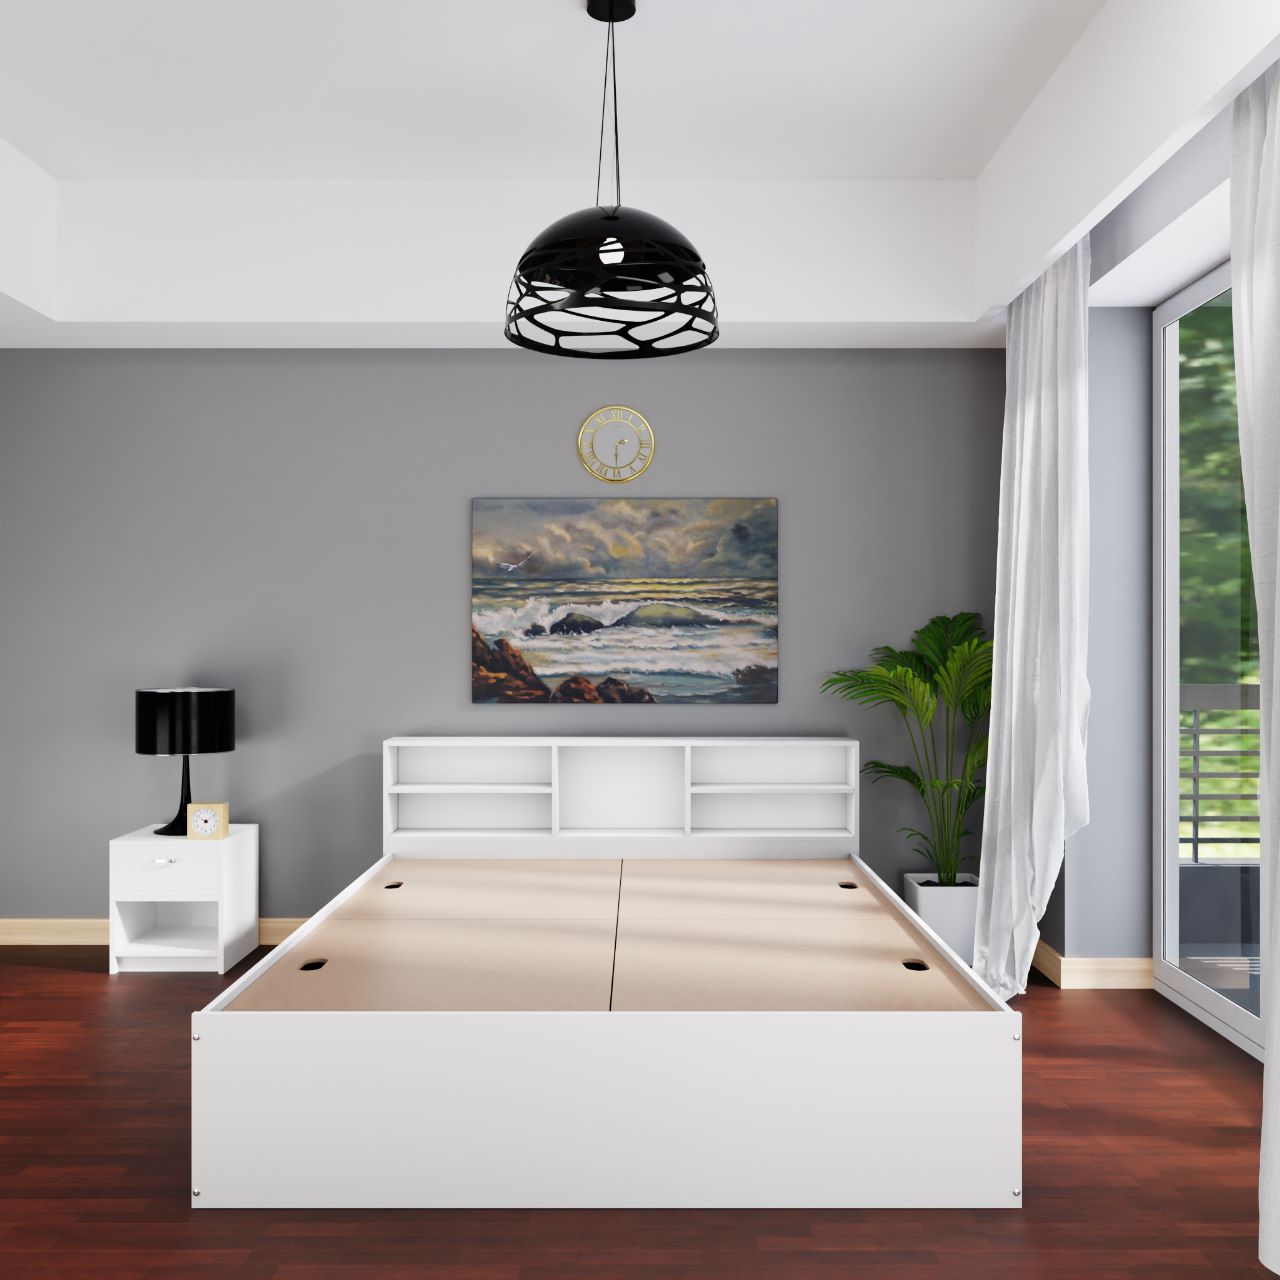 VIKI Engineered Wood Bed With Shelf (Queen size)-2100x1700x800-Frosty white & Wenge Bedroom Furniture Sets VIKI FURNITURE   